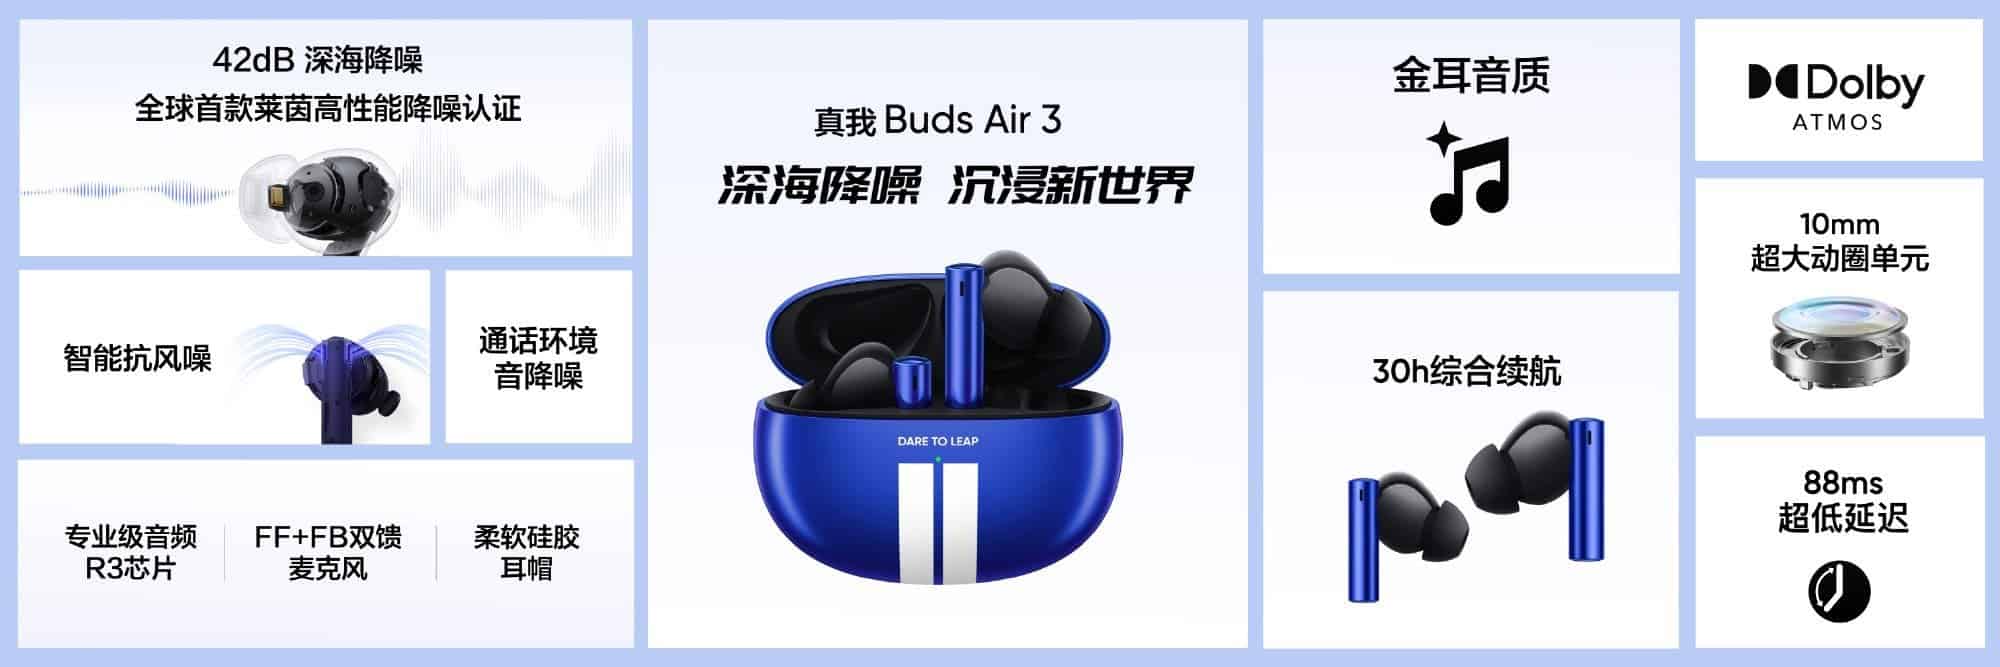 Realme Buds Air 3 India Launch Timeline Revealed, Key Detail Tipped